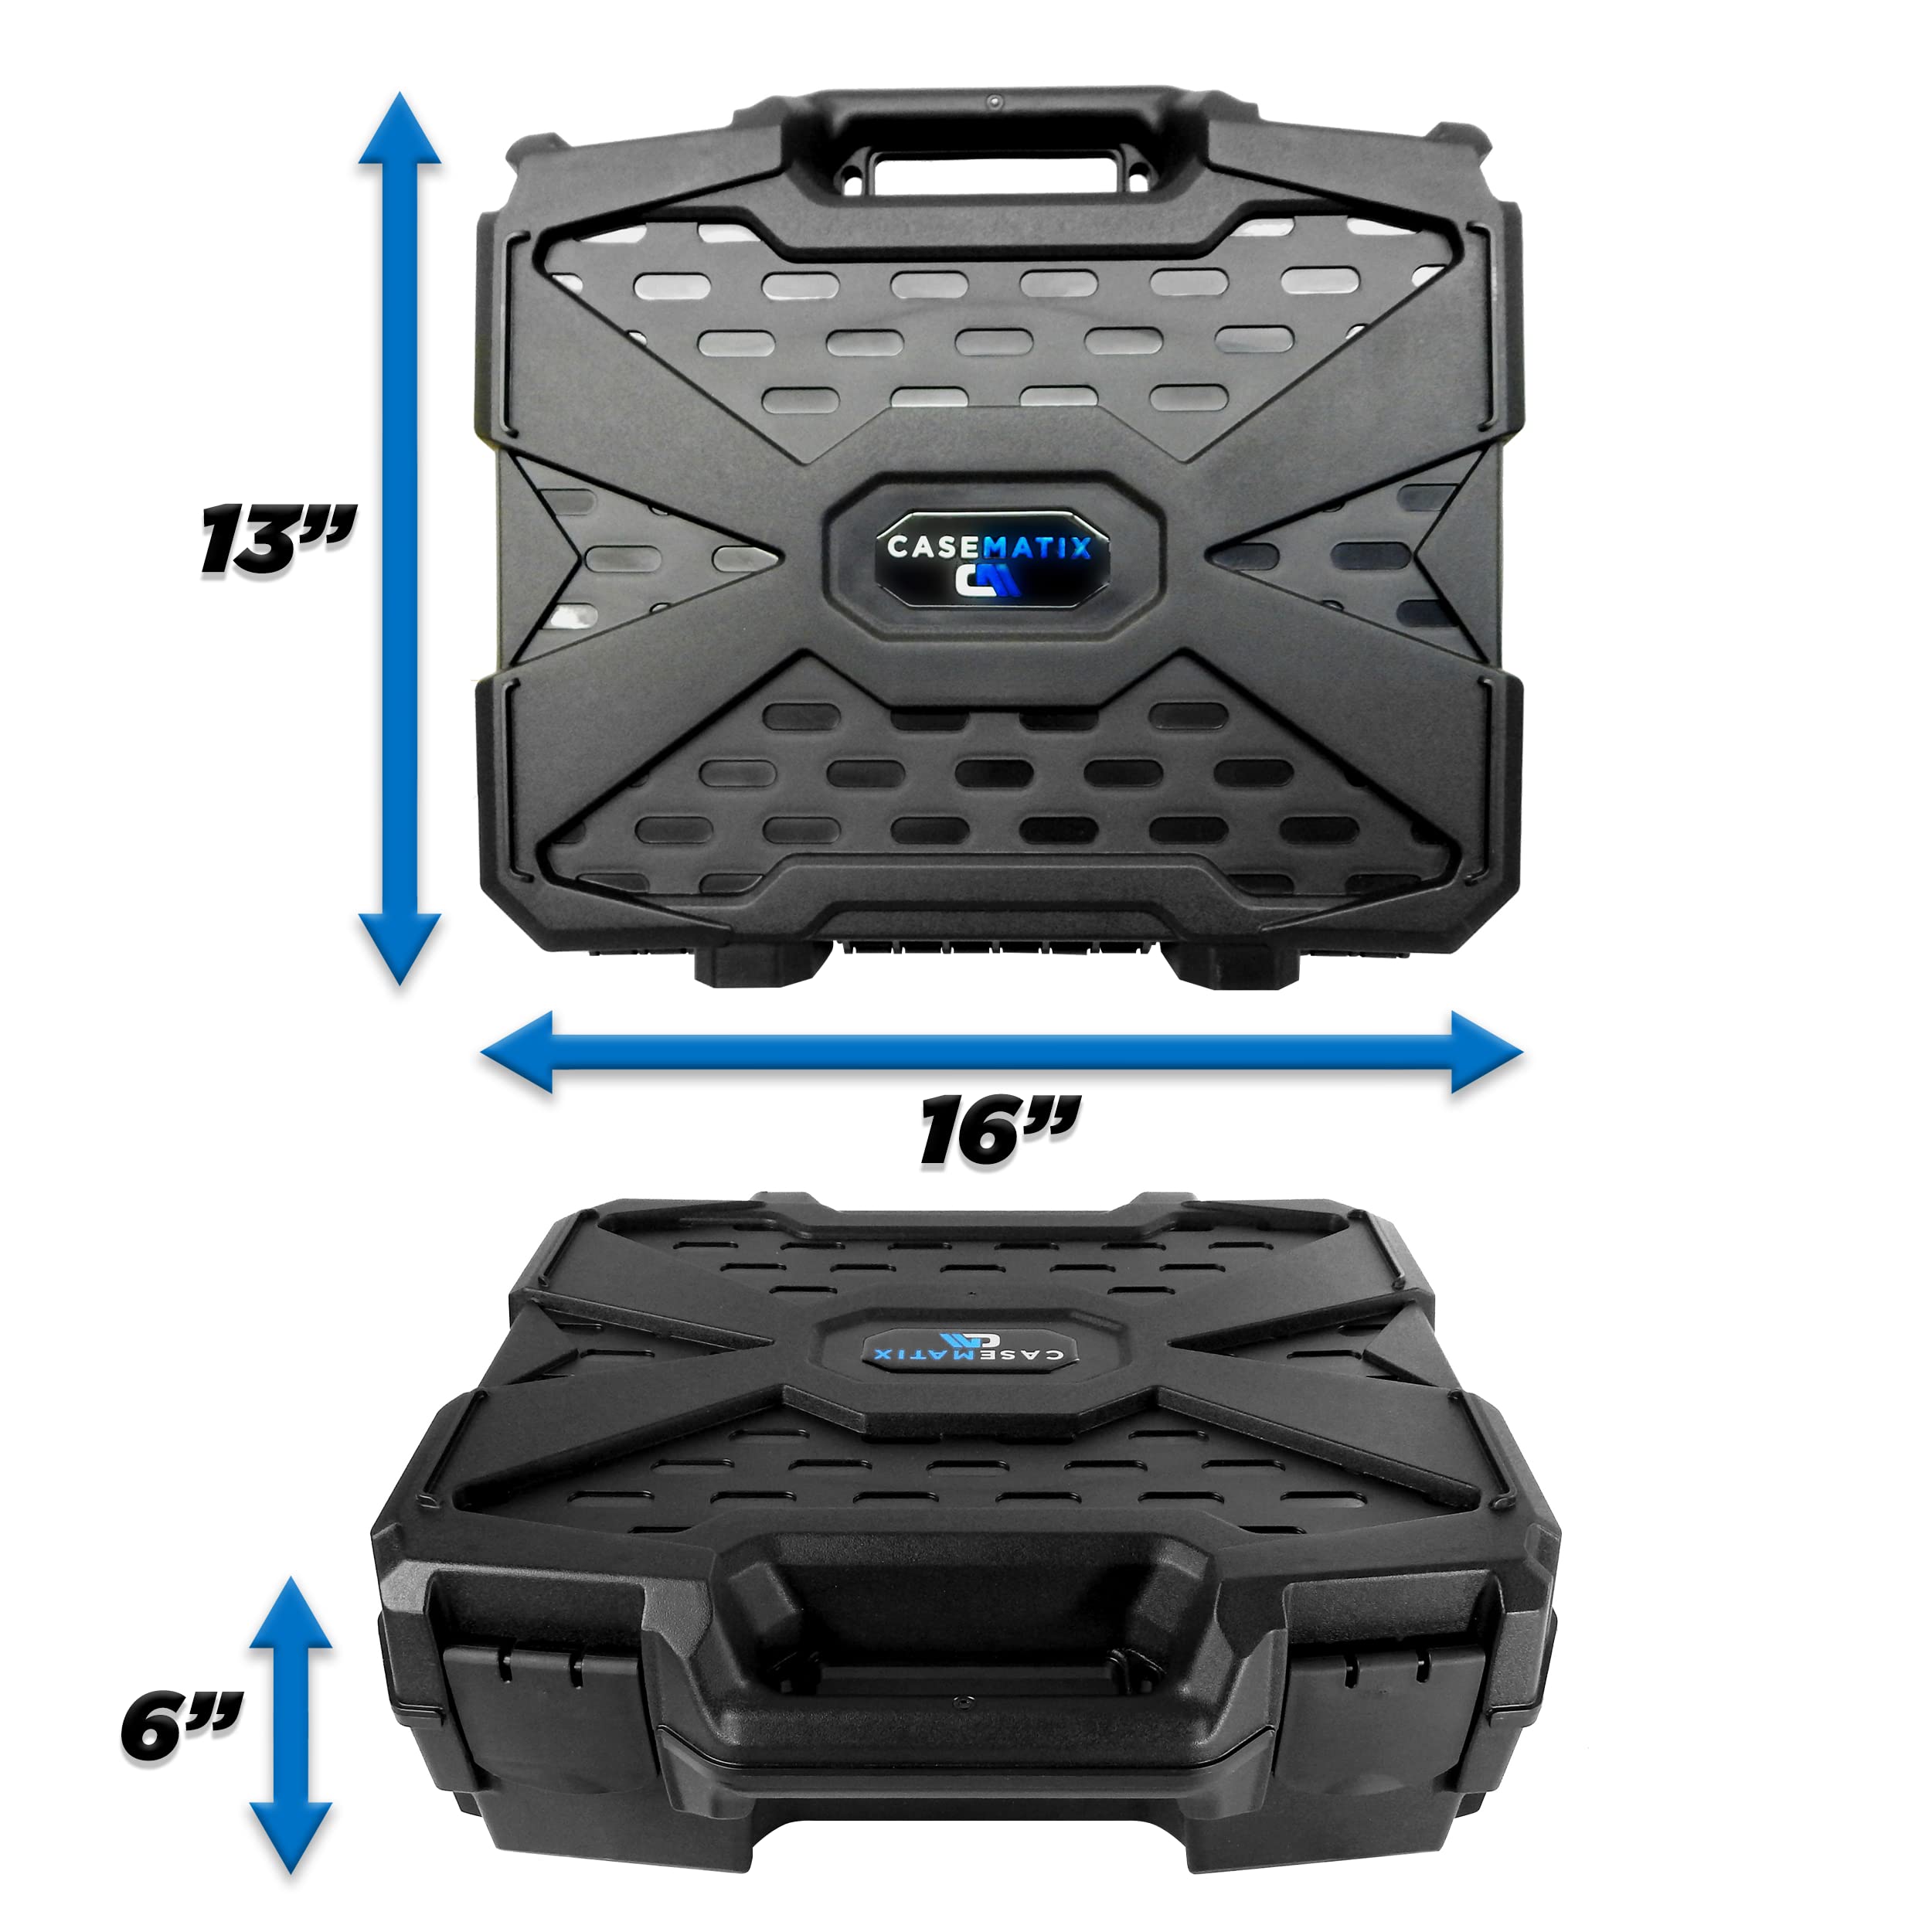 CASEMATIX Miniature Storage Hard Shell Figure Case - Dual Layer Customizable Foam Miniature Case for Carrying Standard Miniatures, Large Units and Vehicles, Compatible with Warhammer 40k, DND & More!